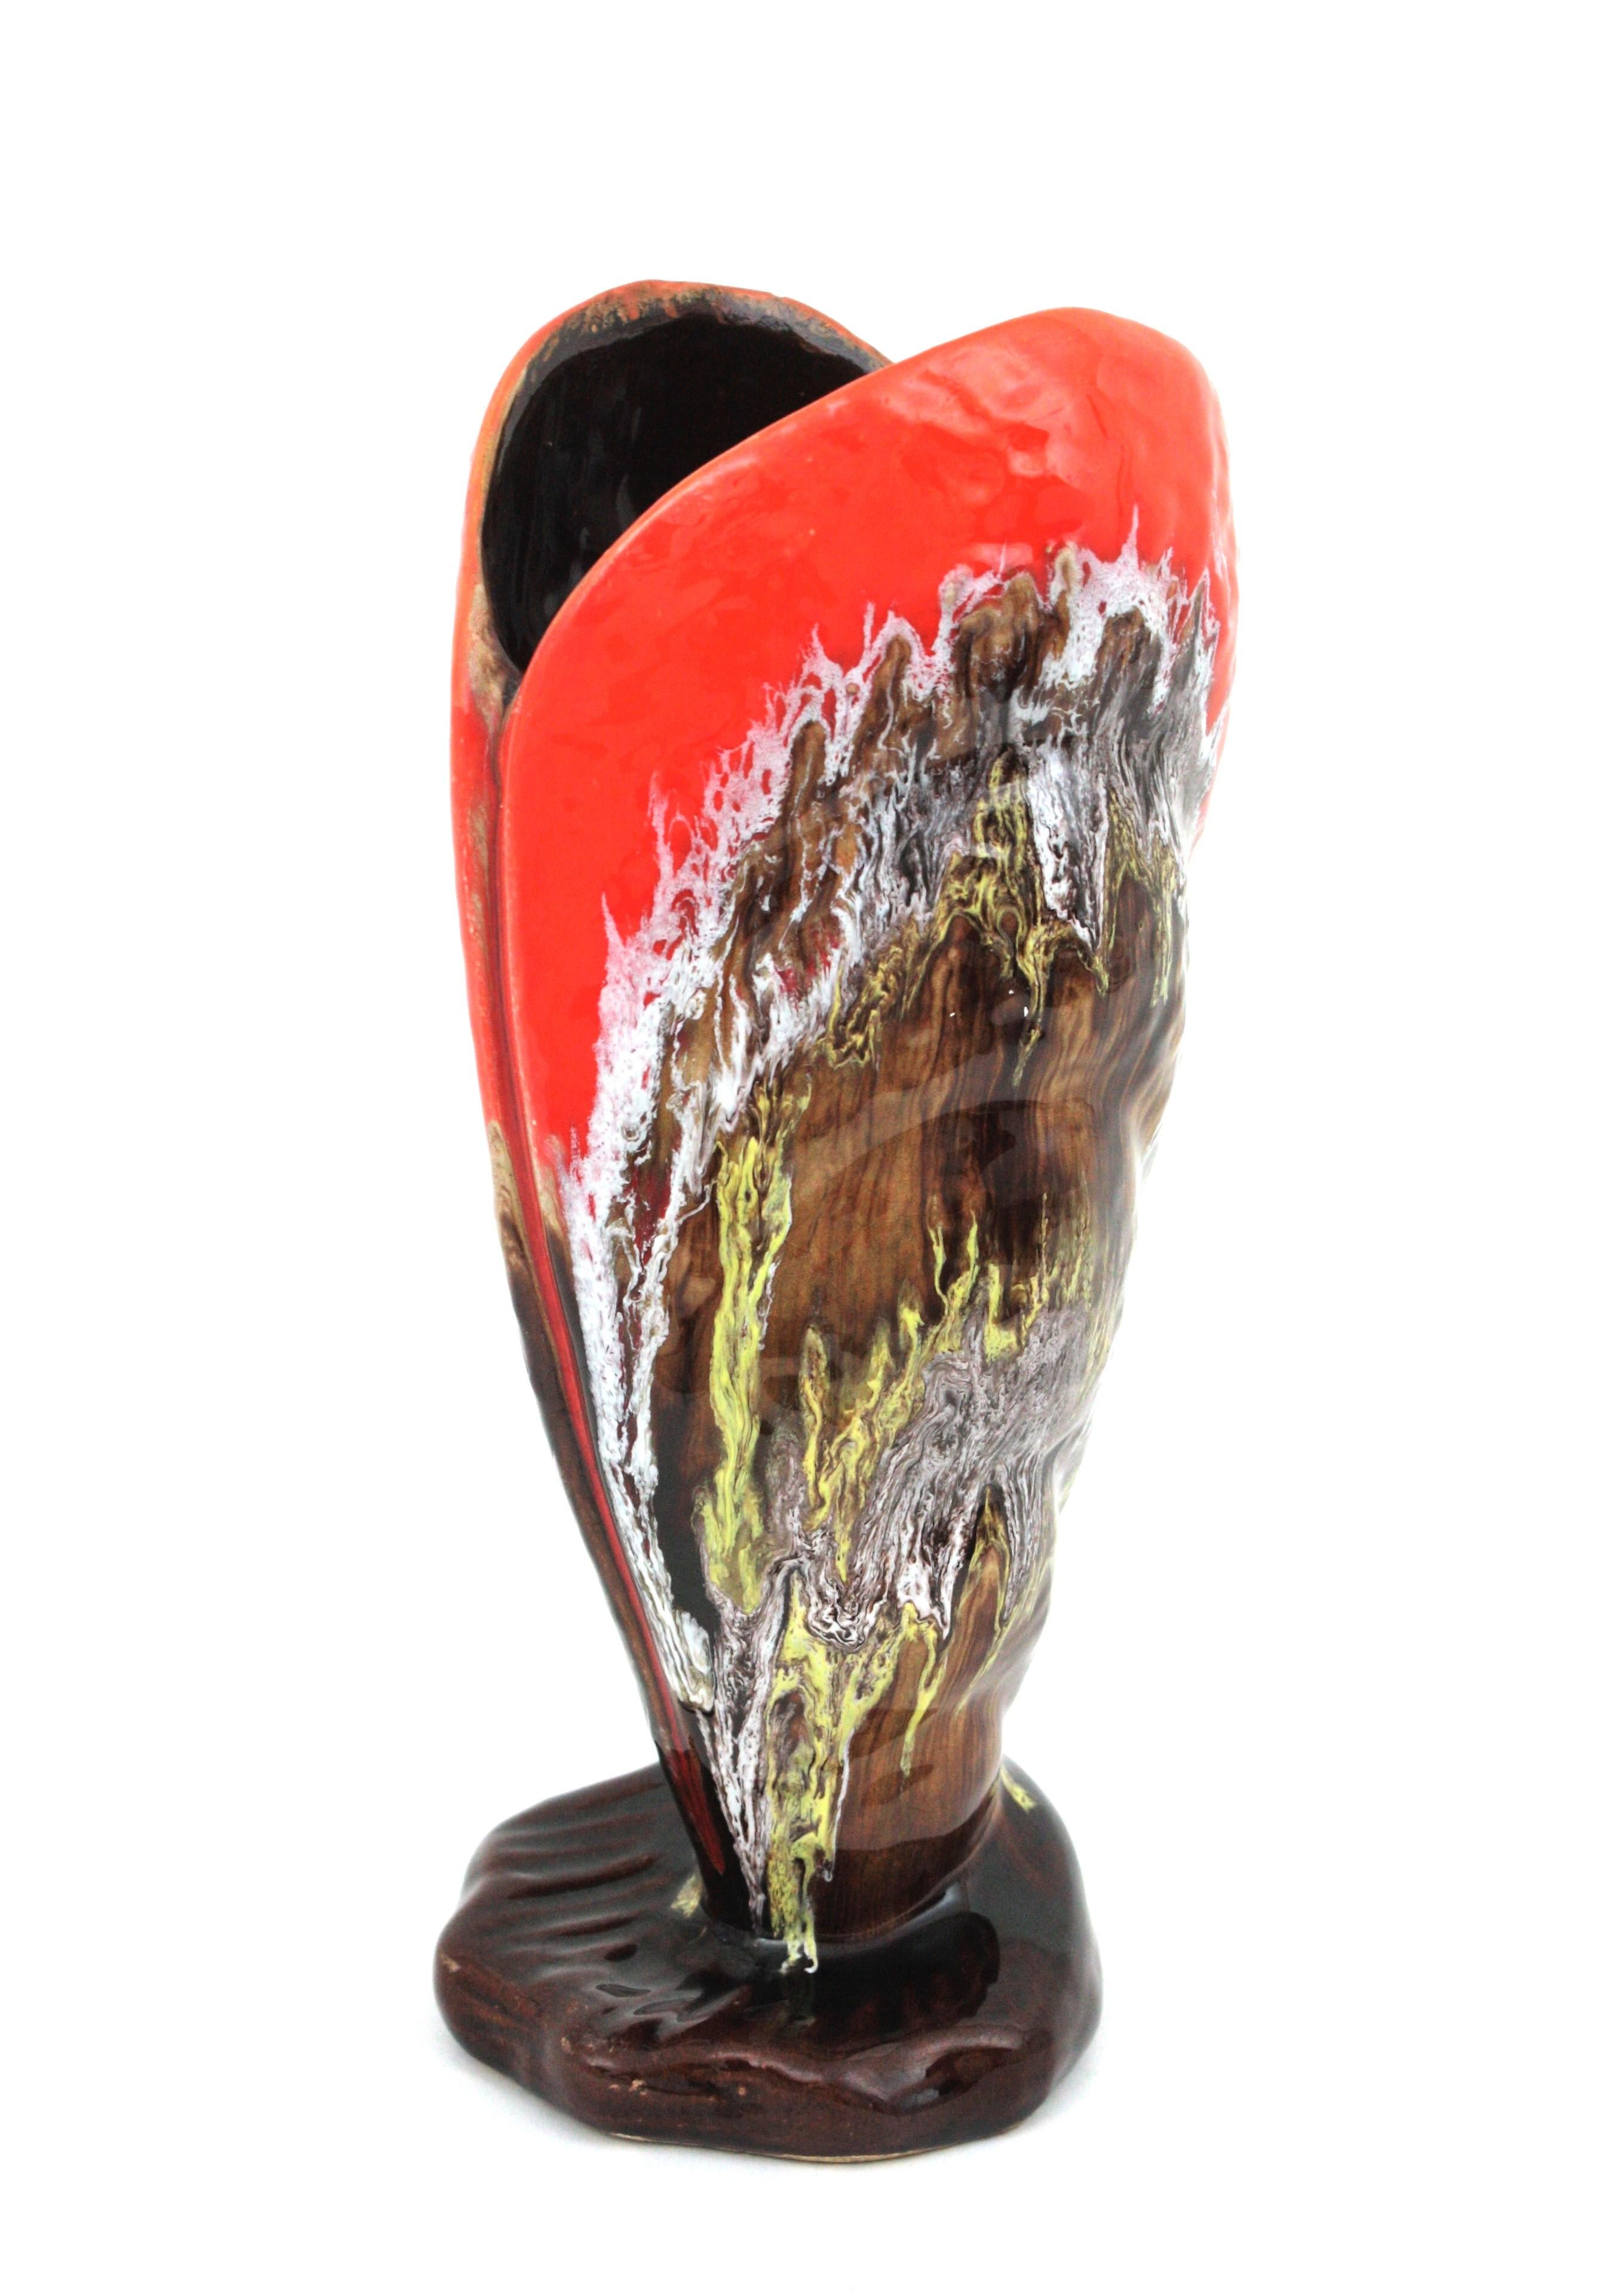 Hand-Crafted Large Vallauris Majolica Shell Shaped Vase, Orange and Brown Glazed Ceramic For Sale